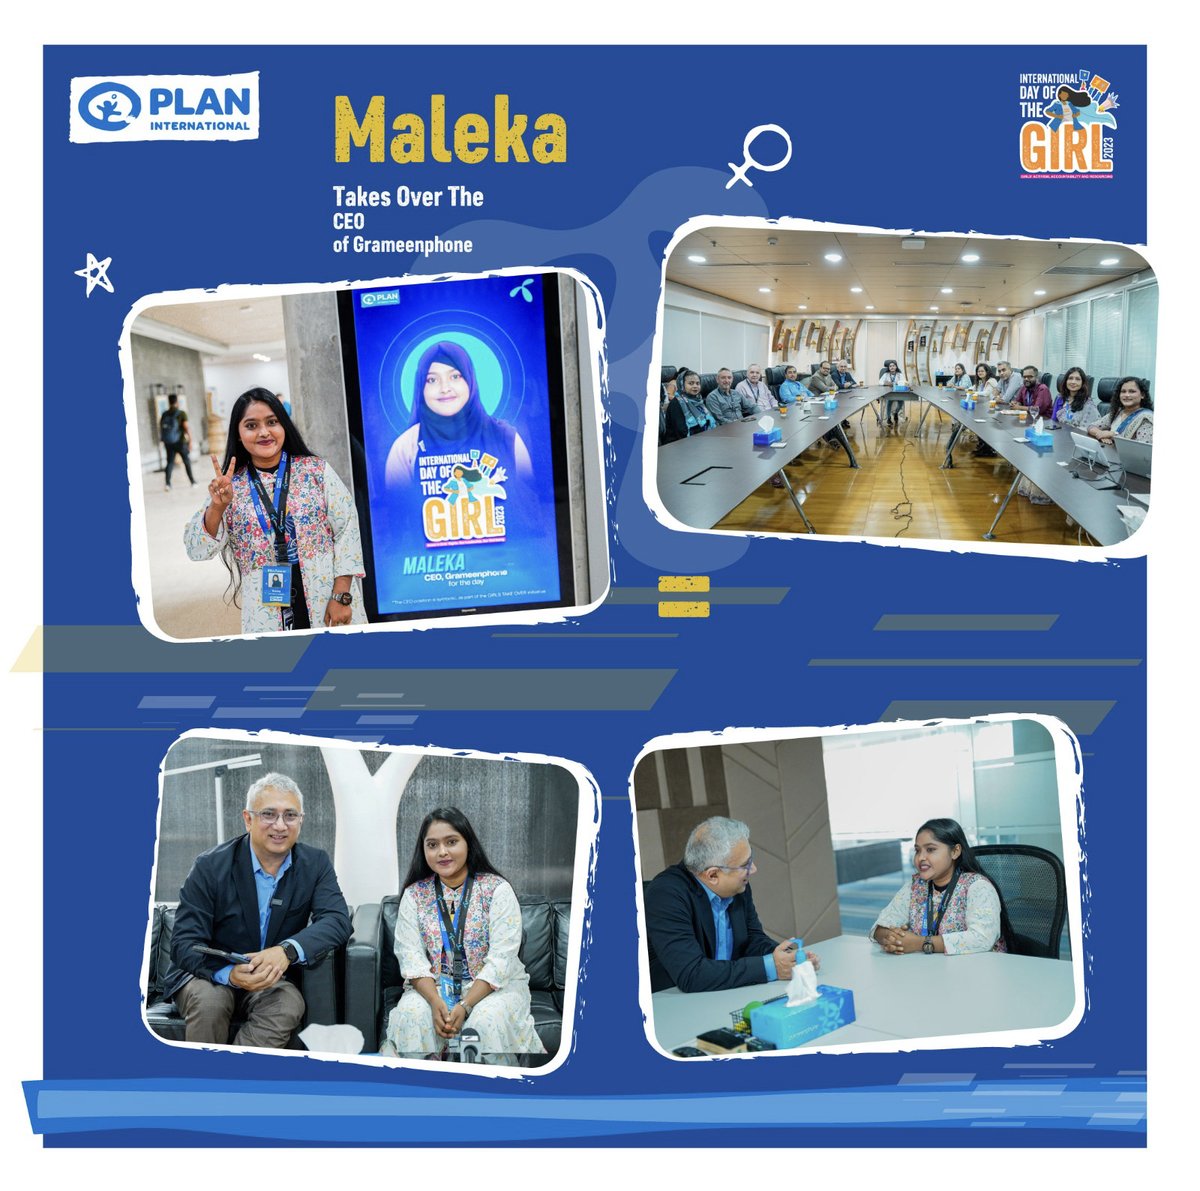 Maleka becomes GP’s CEO for the Day!  Maleka stepped into the role of Yasir Azman, the Chief Executive Officer of @Grameenphone, for a day, symbolizing the potential and aspirations of young girls in Bangladesh. 
#IDG23 #GirlsTakeover #GTO📷 #EqualPower #RewriteHerStory